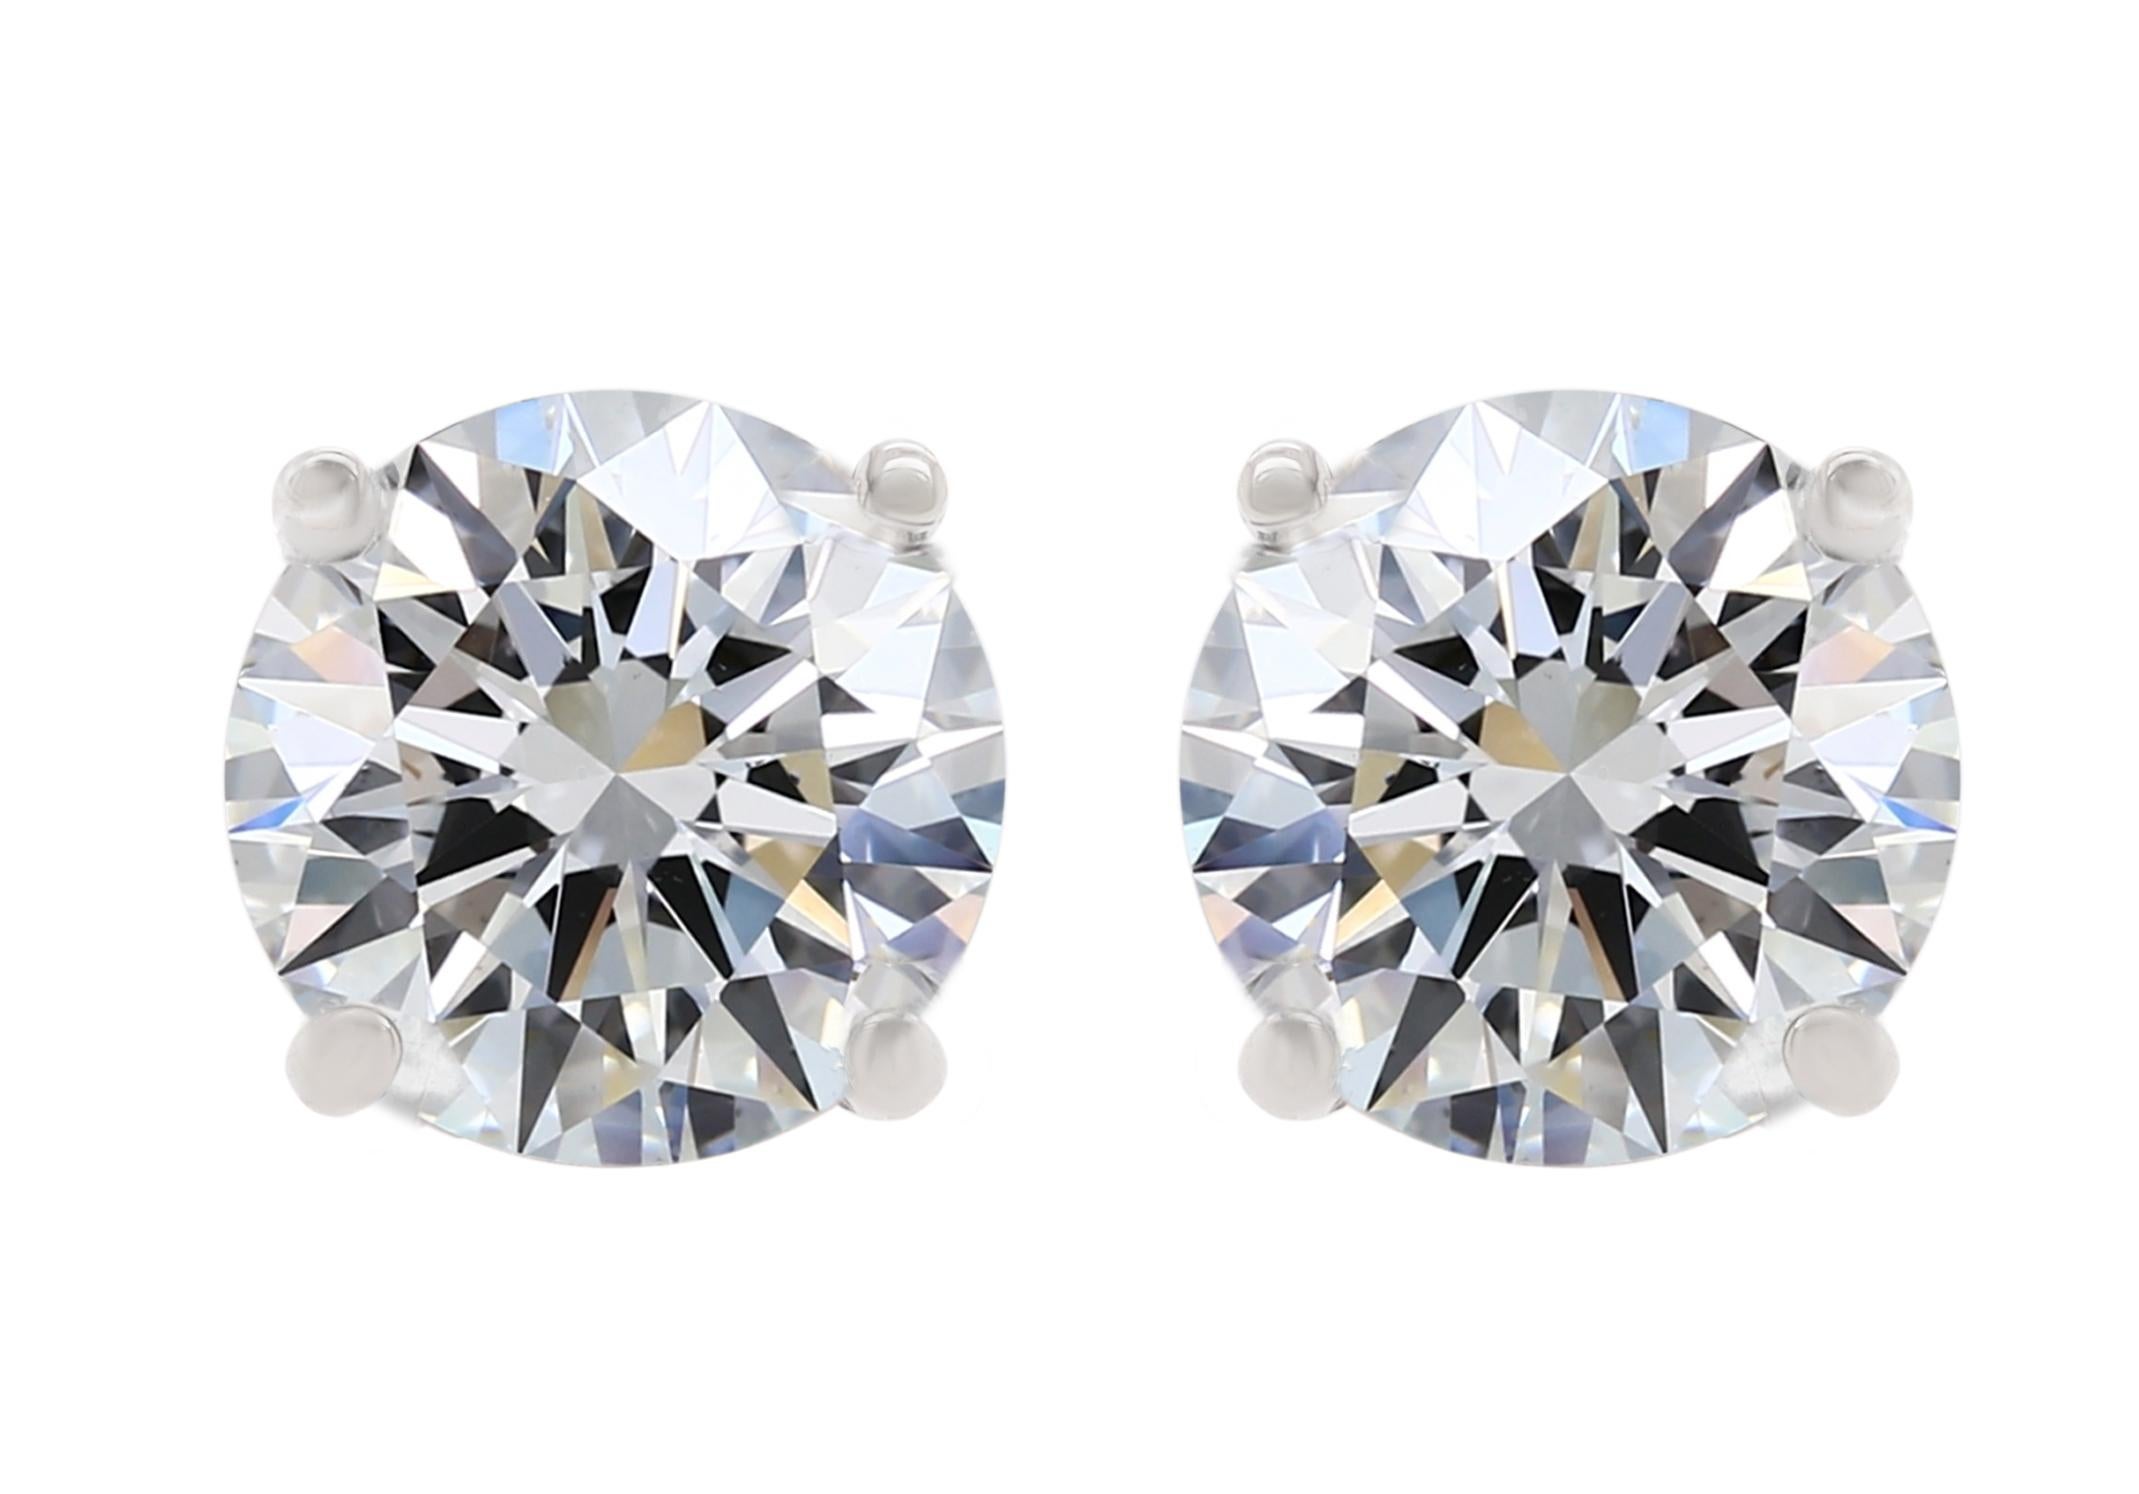 Brilliant Cut Diana M. 4 Prong Mounting Near Colored White  5.62 Carat Diamond Studs For Sale